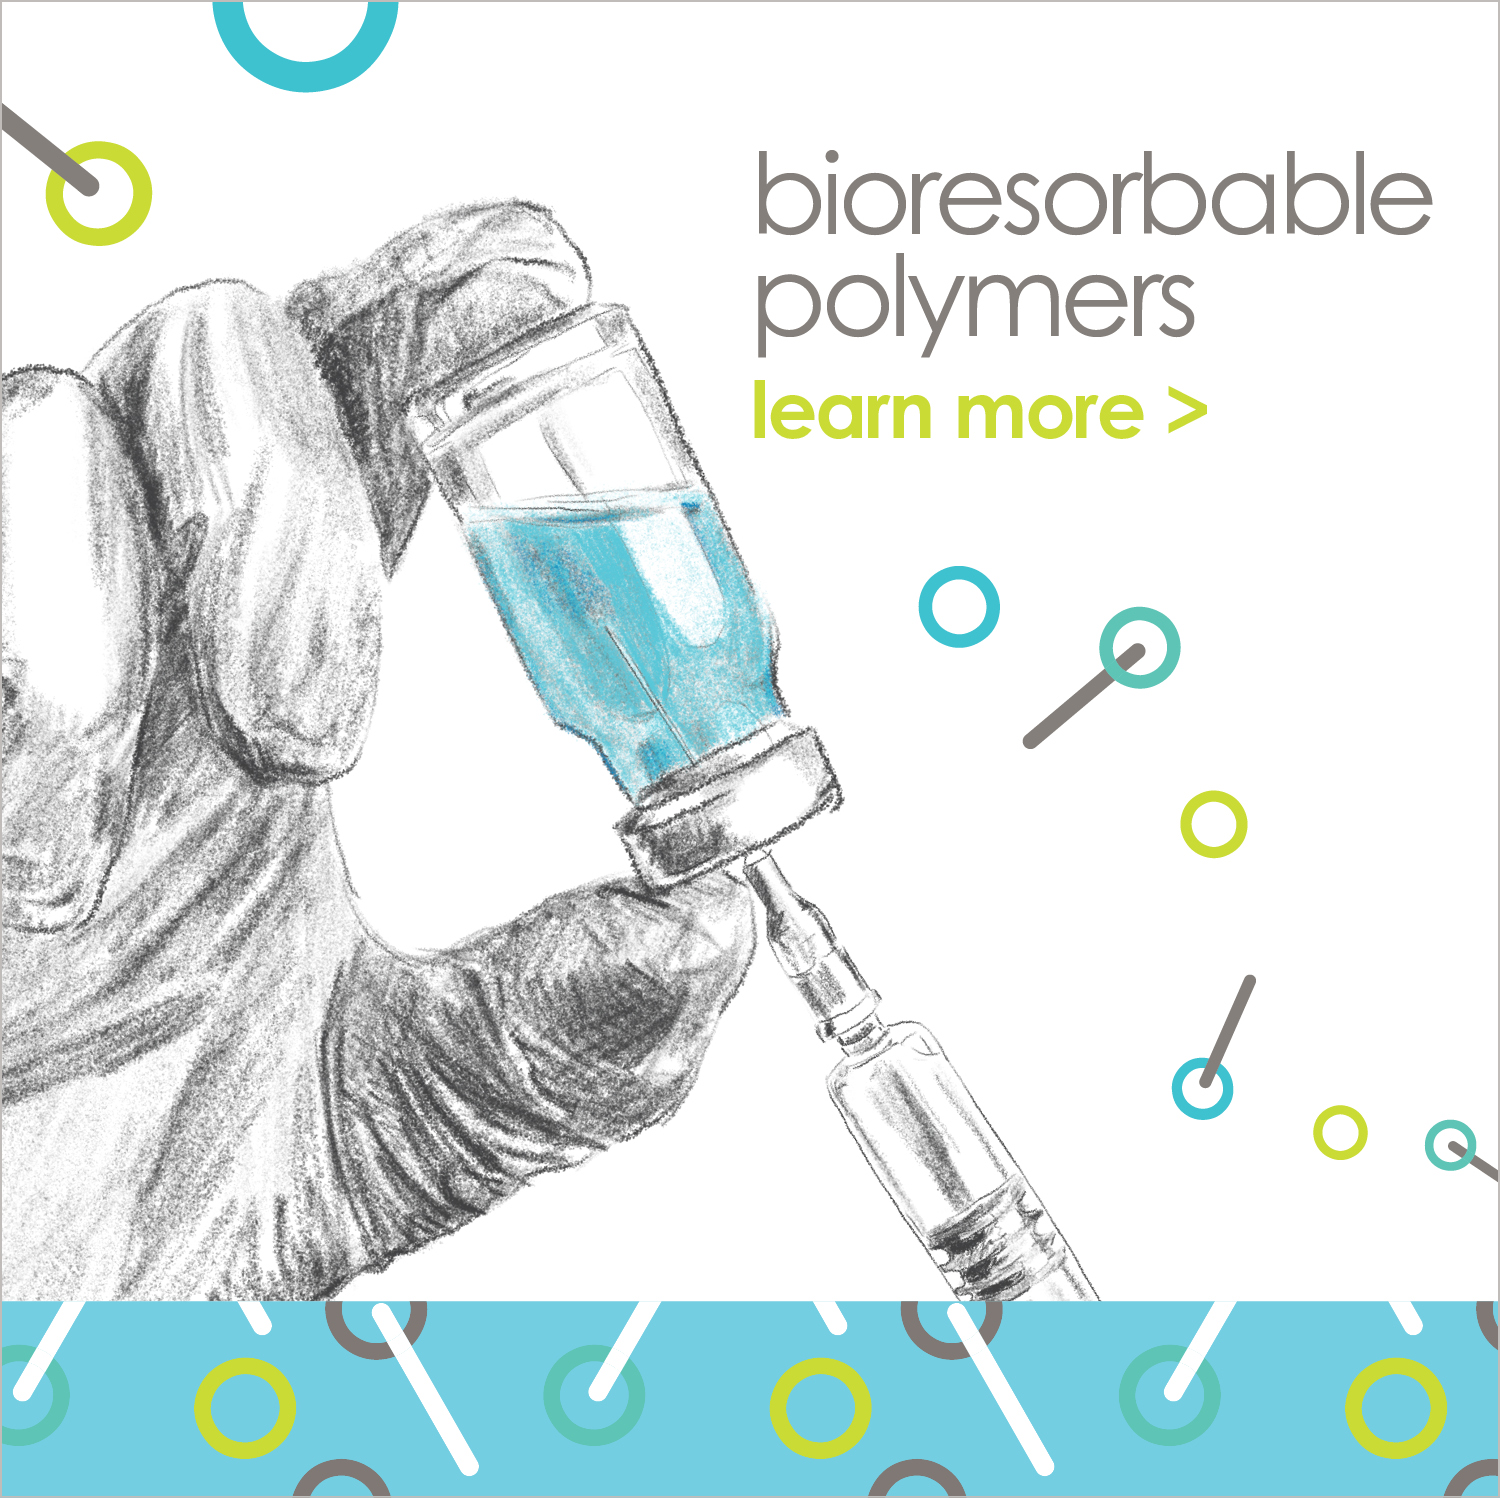 bioresorbable-polymers-callout.jpg